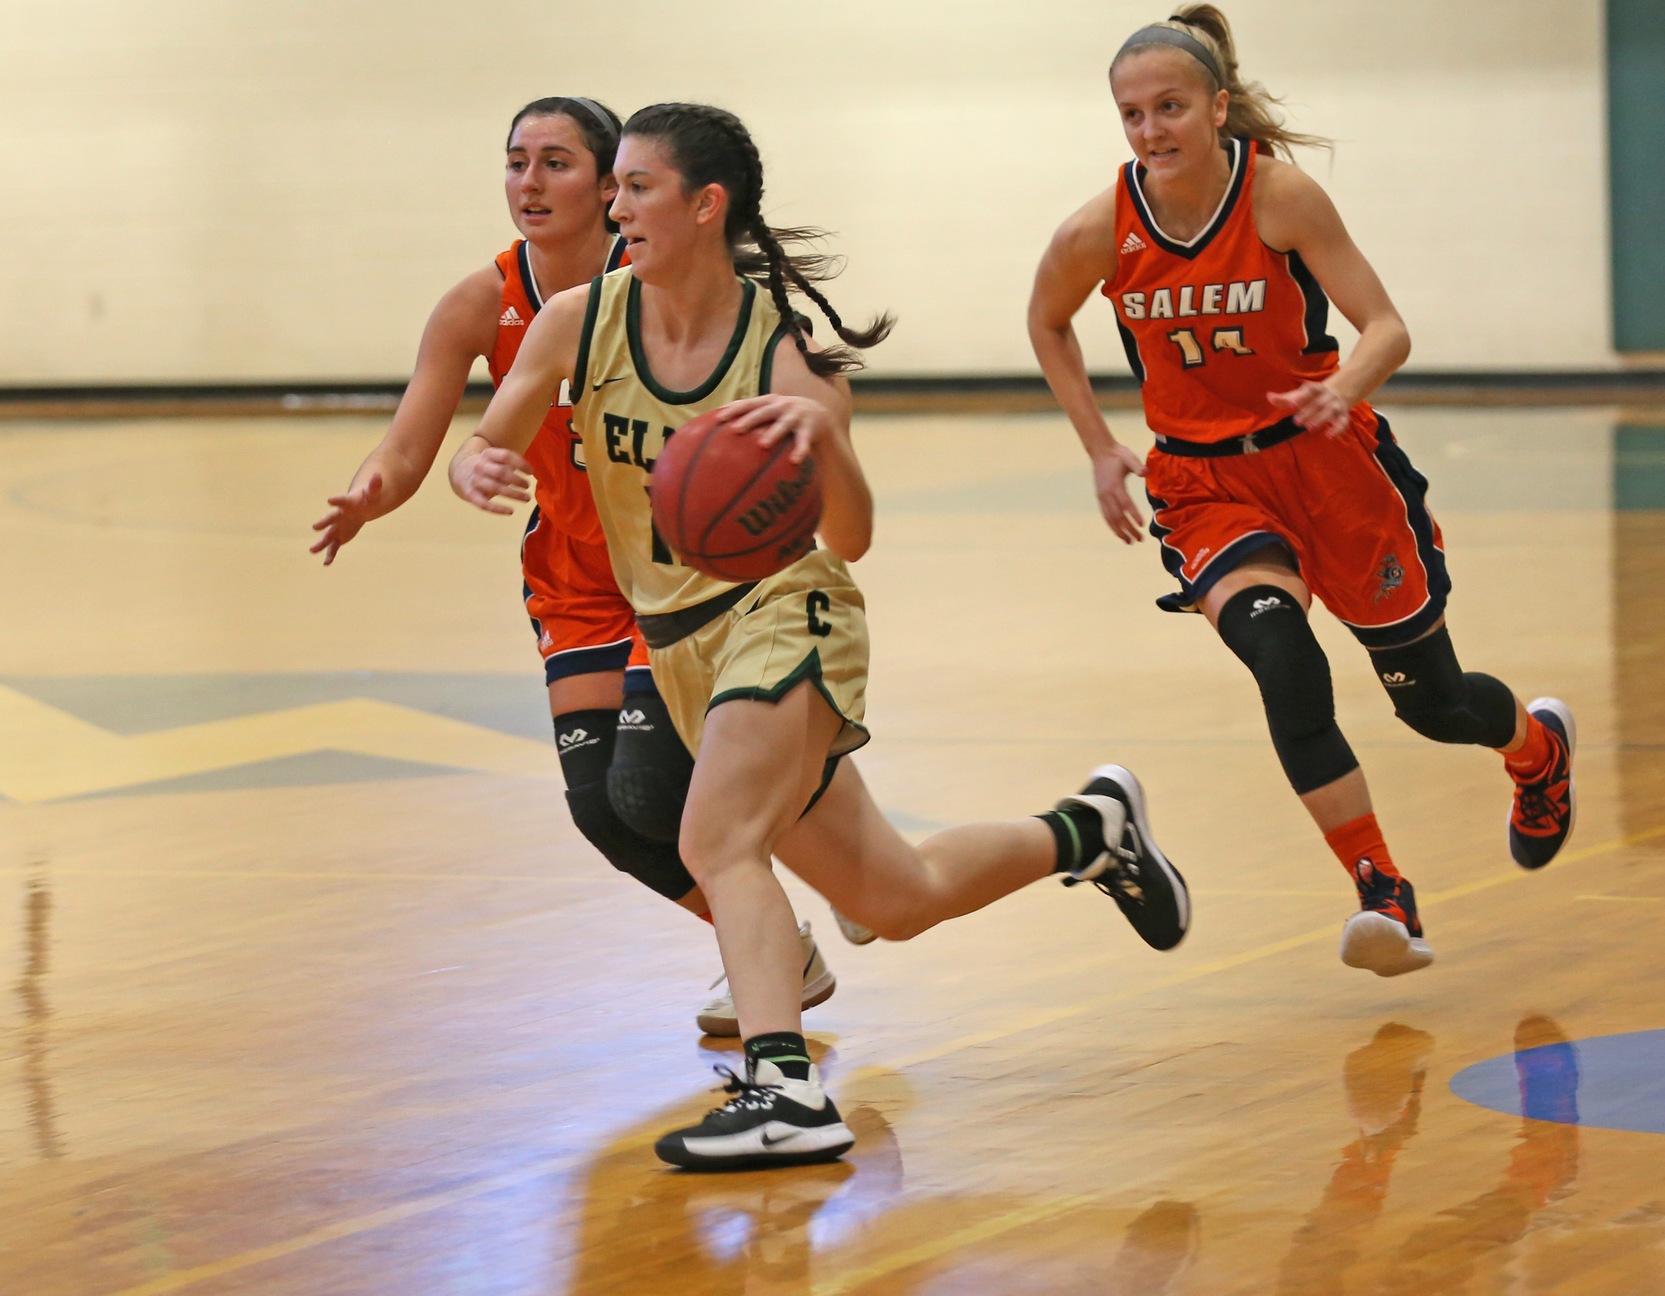 Women’s Basketball Comes Up Short At Wentworth